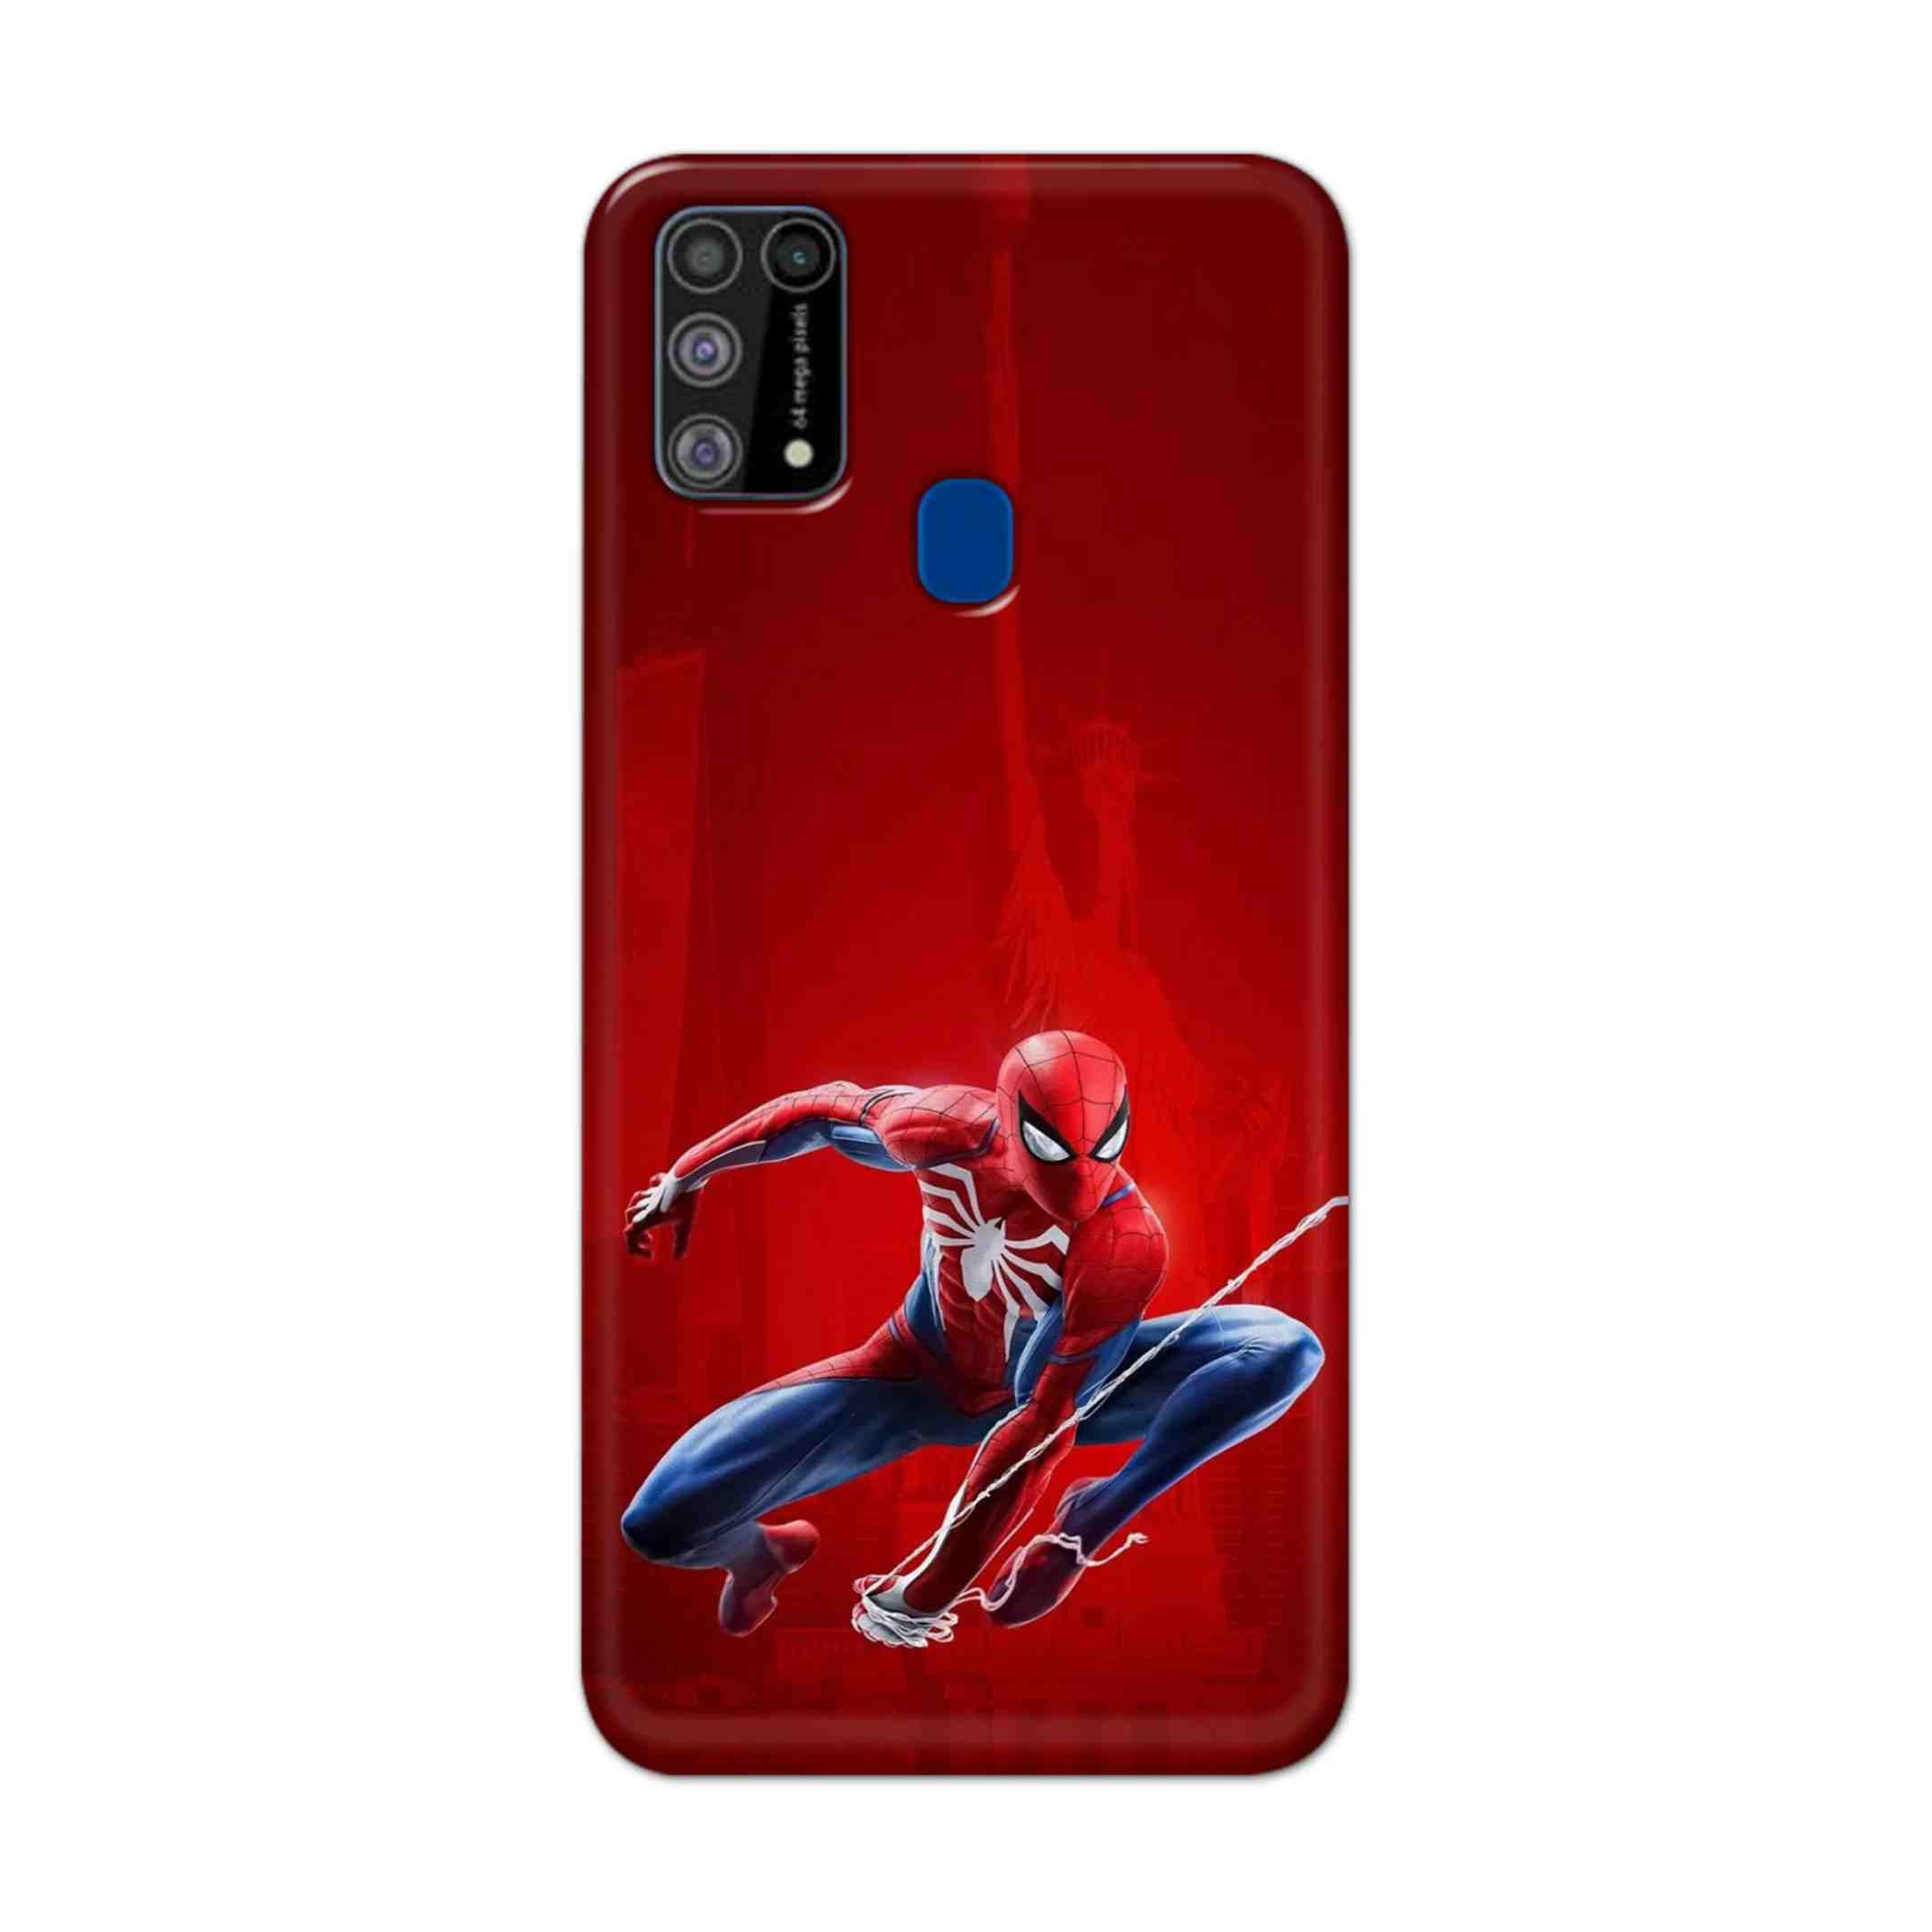 Buy Spiderman Hard Back Mobile Phone Case Cover For Samsung Galaxy M31 Online